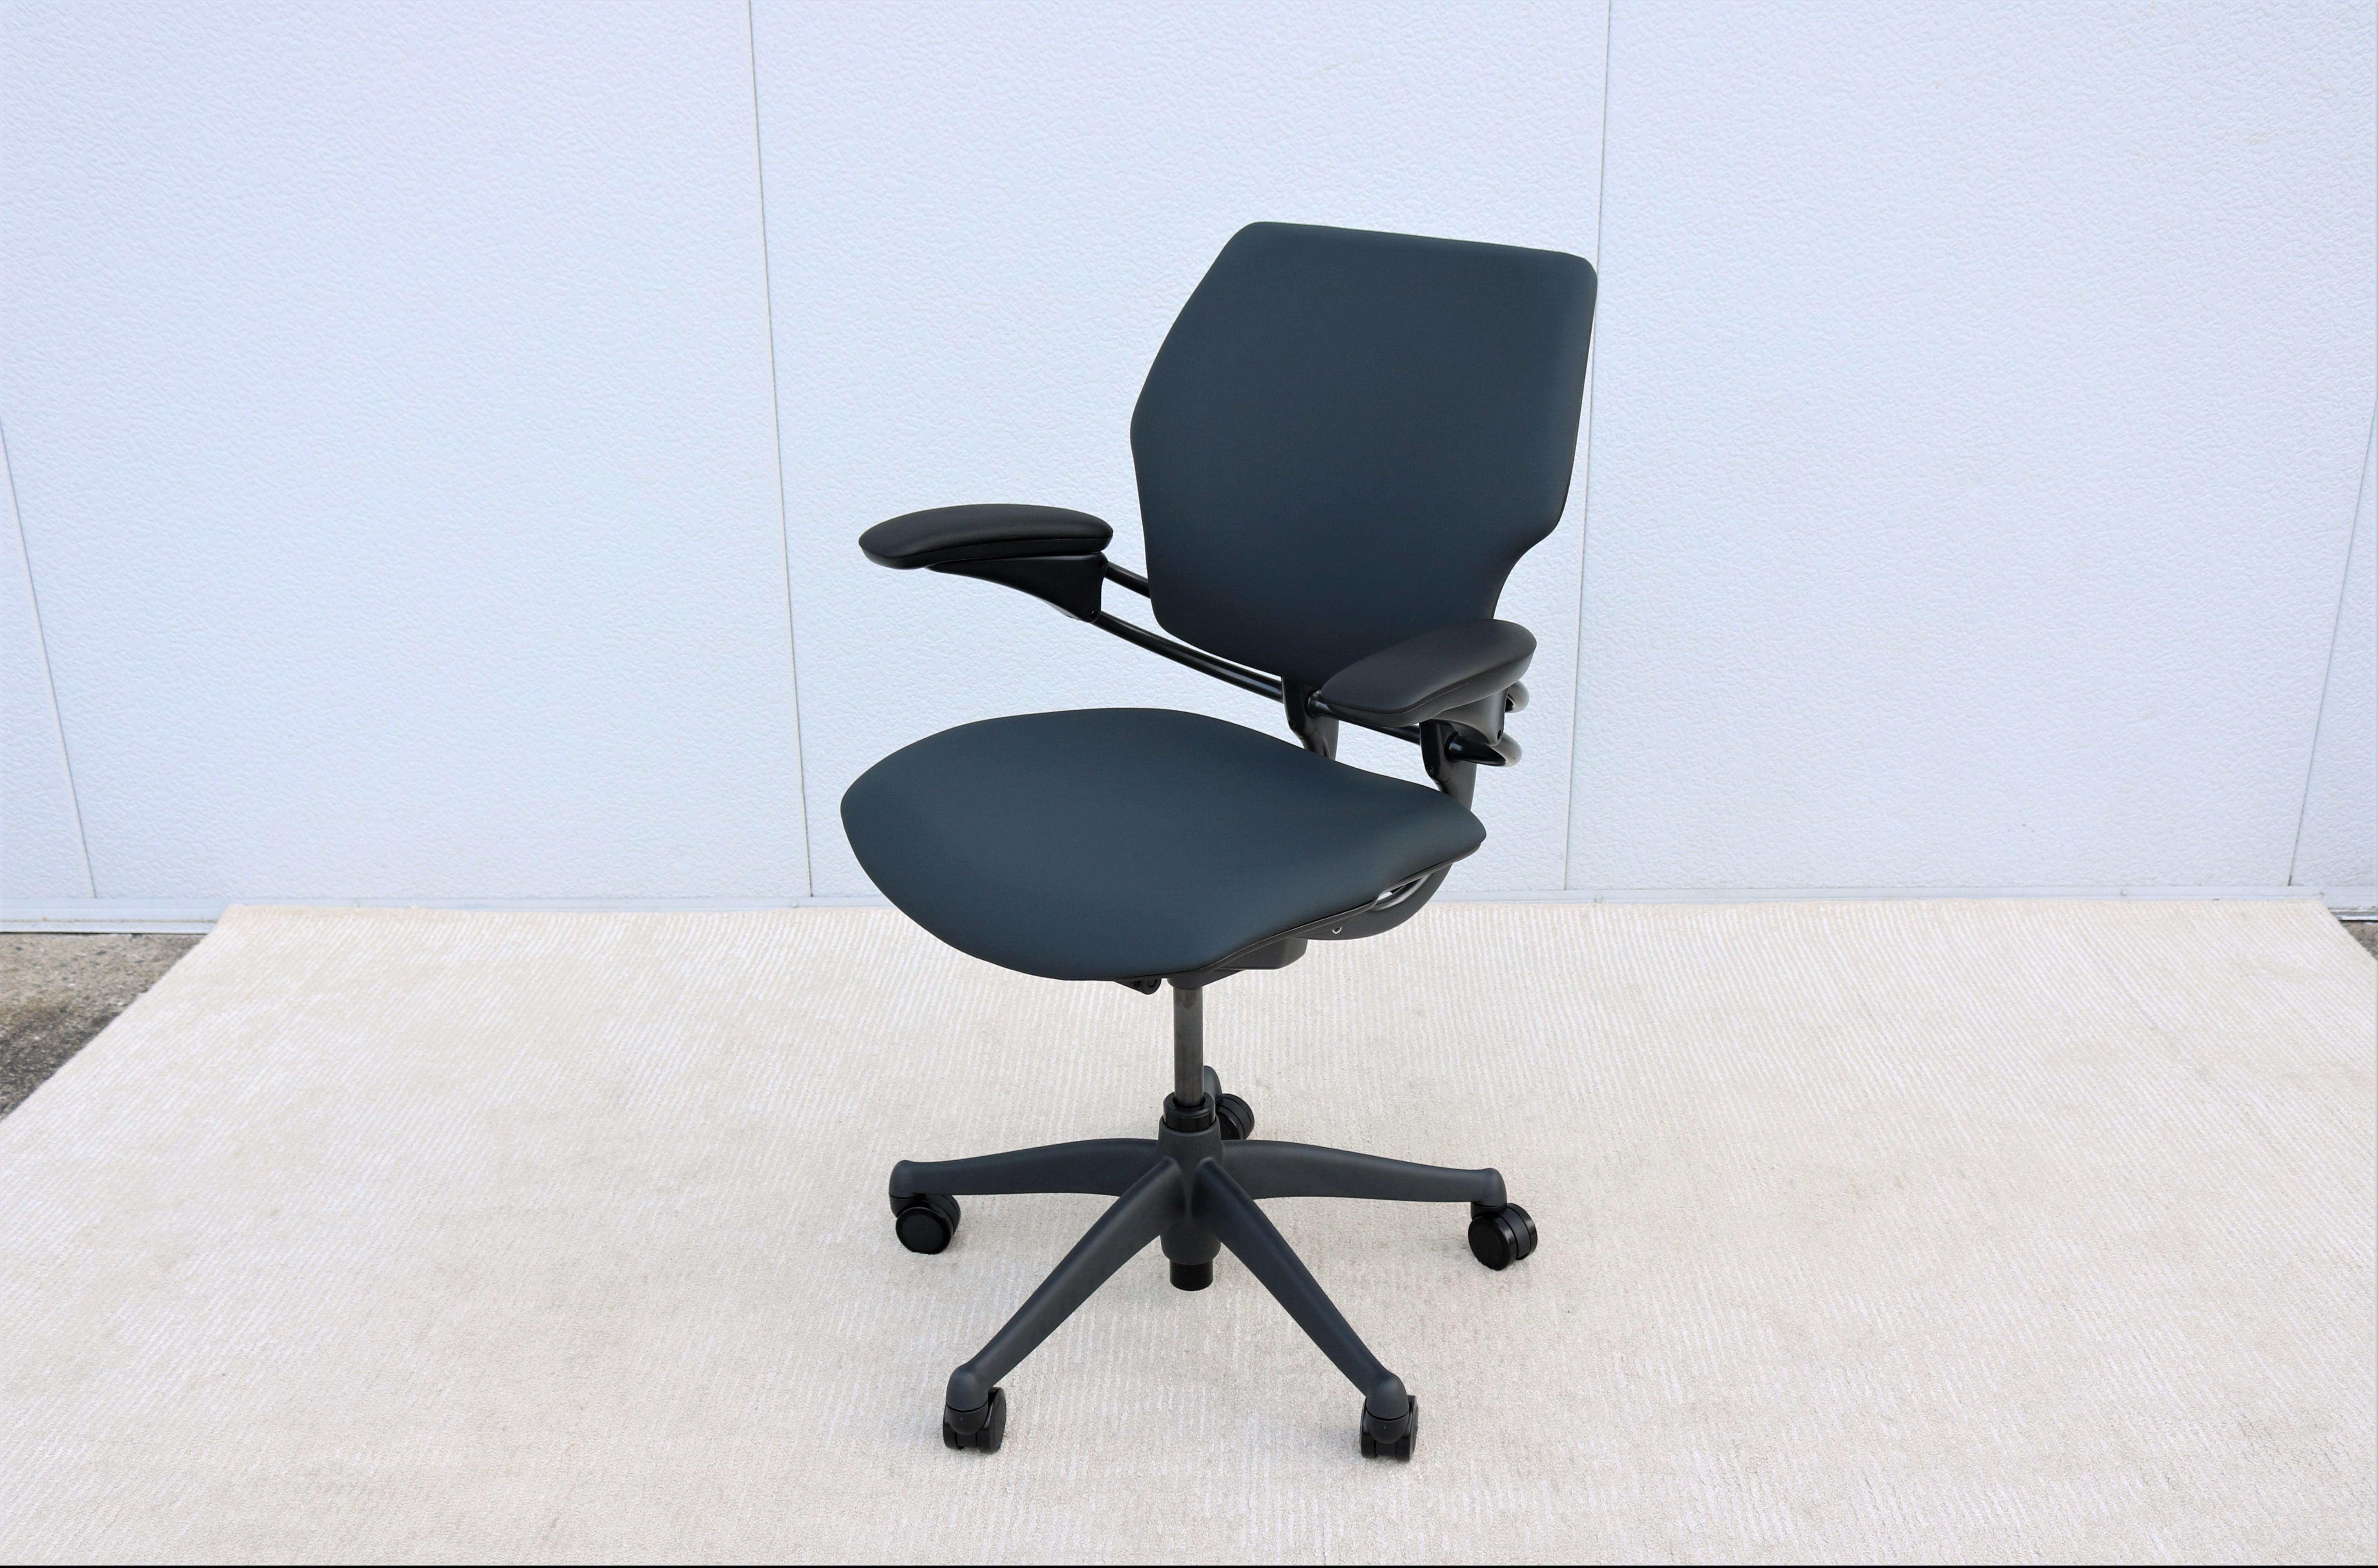 American Humanscale Ergonomic Freedom Task Desk Chair Fully Adjustable, Brand New in Box For Sale